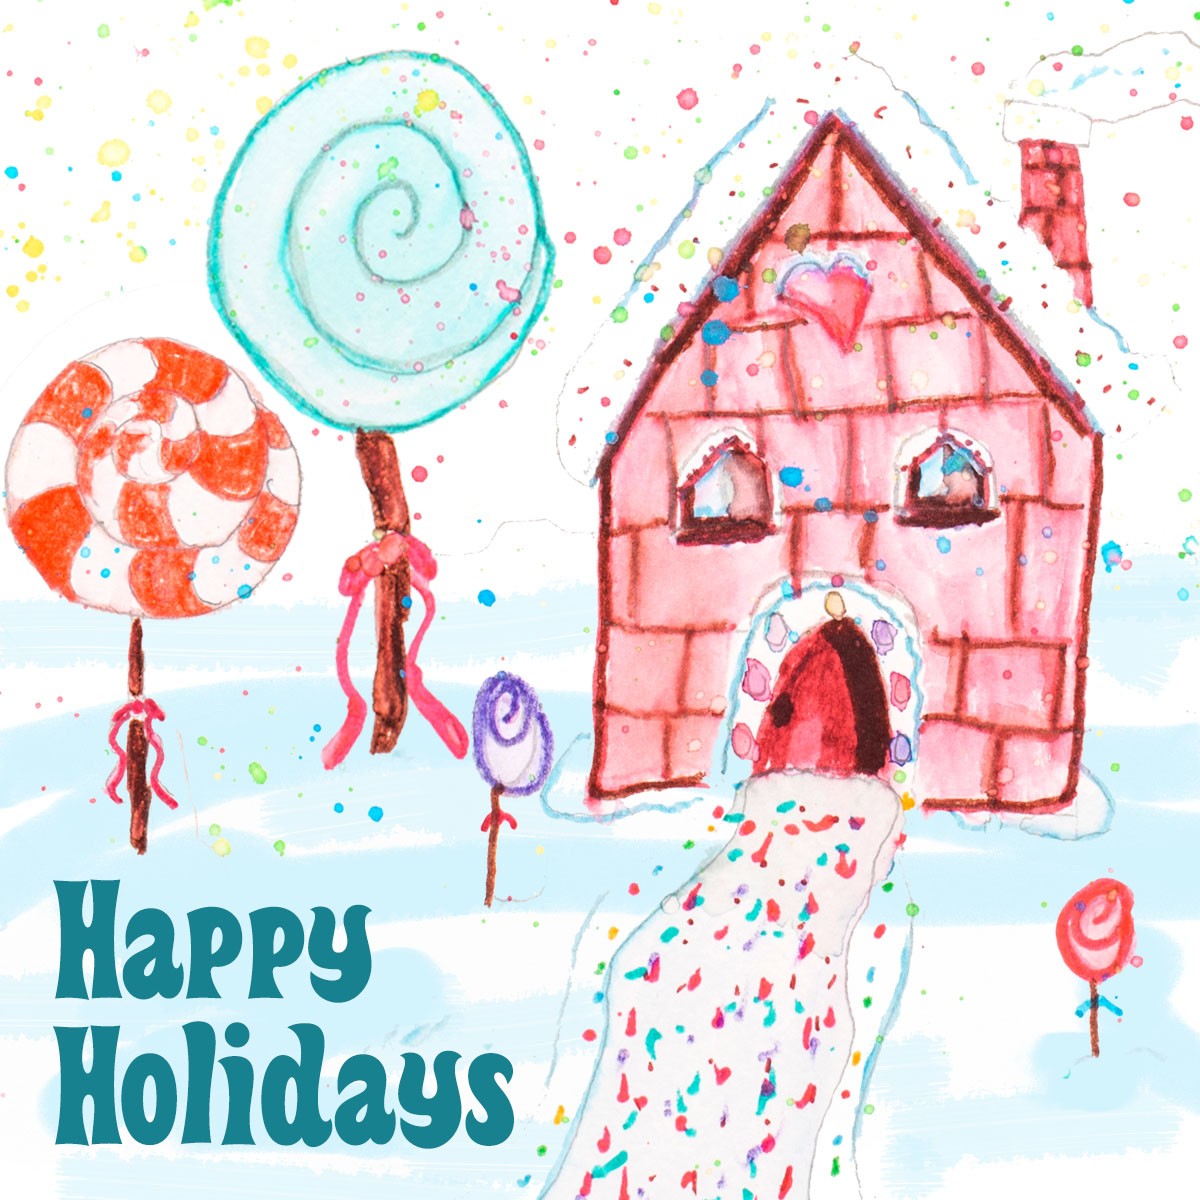 Happy Holidays card artwork of a candy house inspired by St. Jude patient Ty.